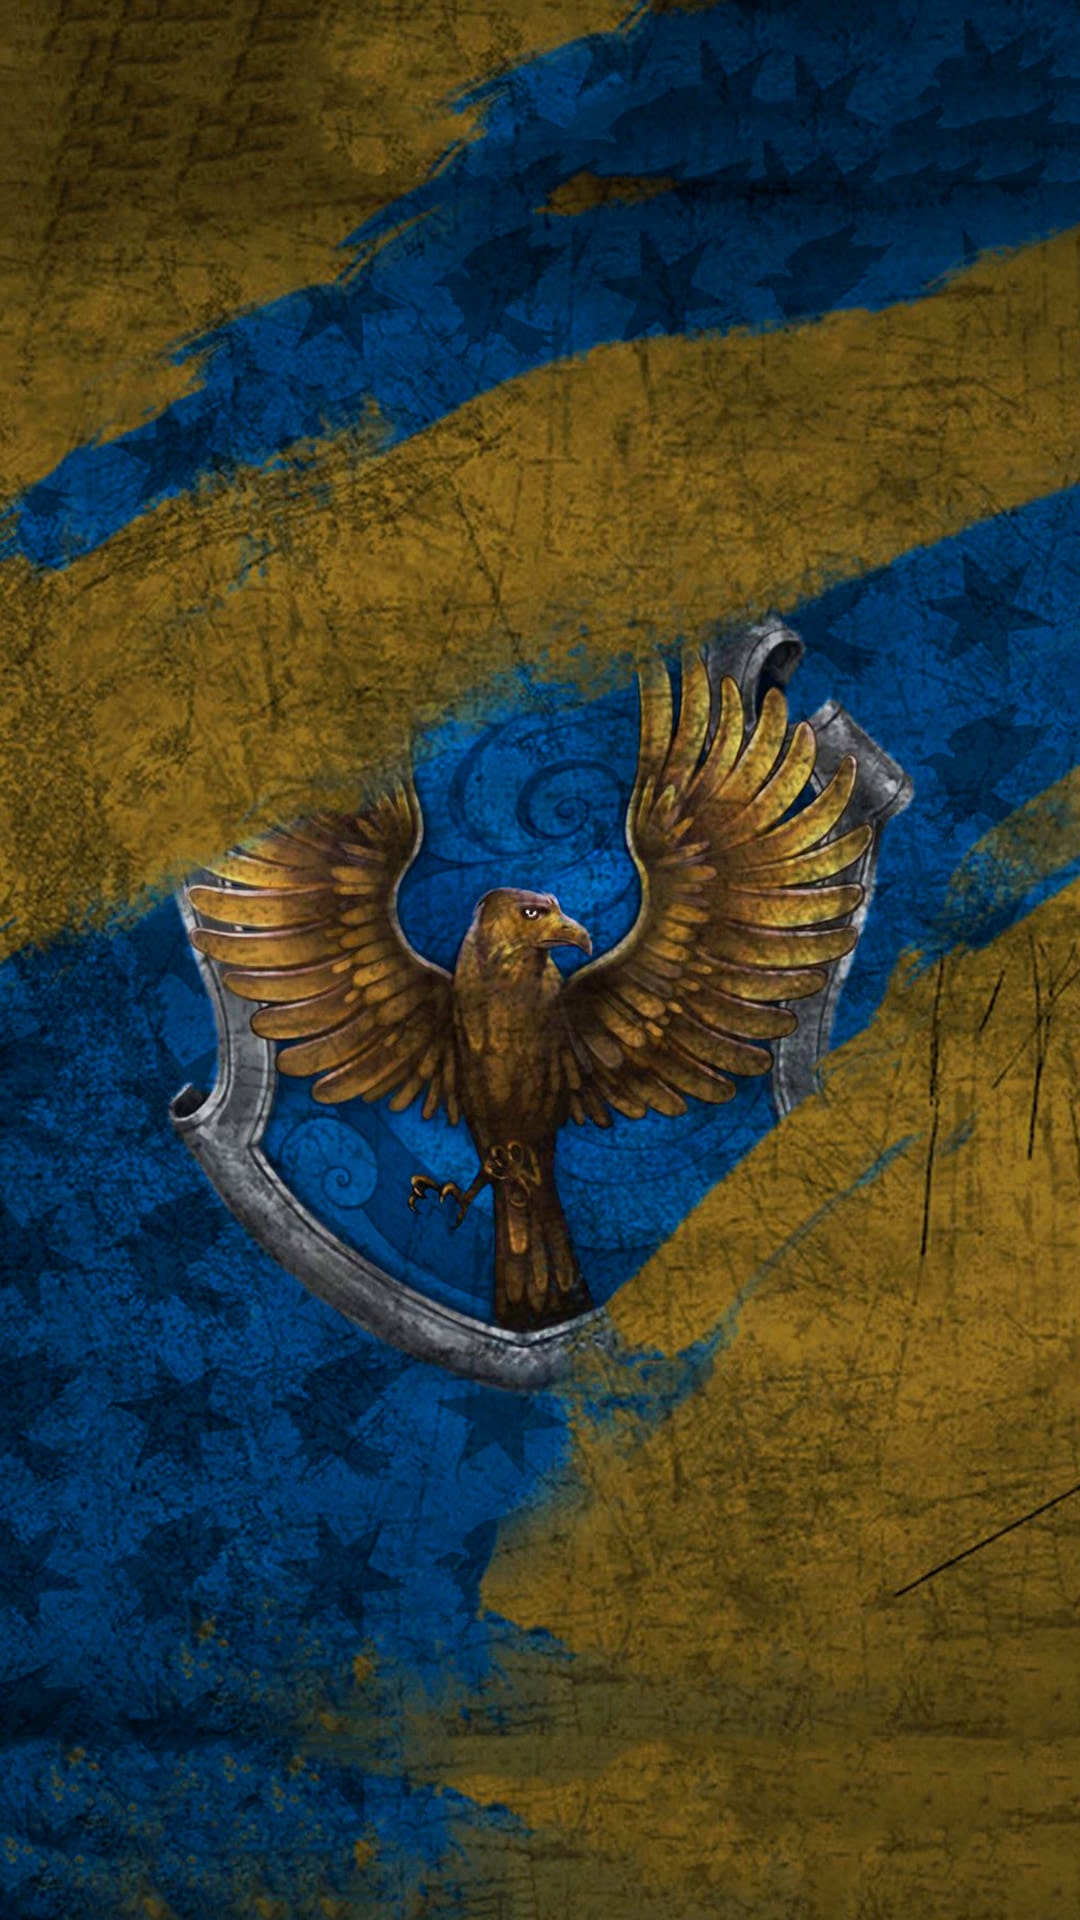 Ravenclaw House Wallpapers